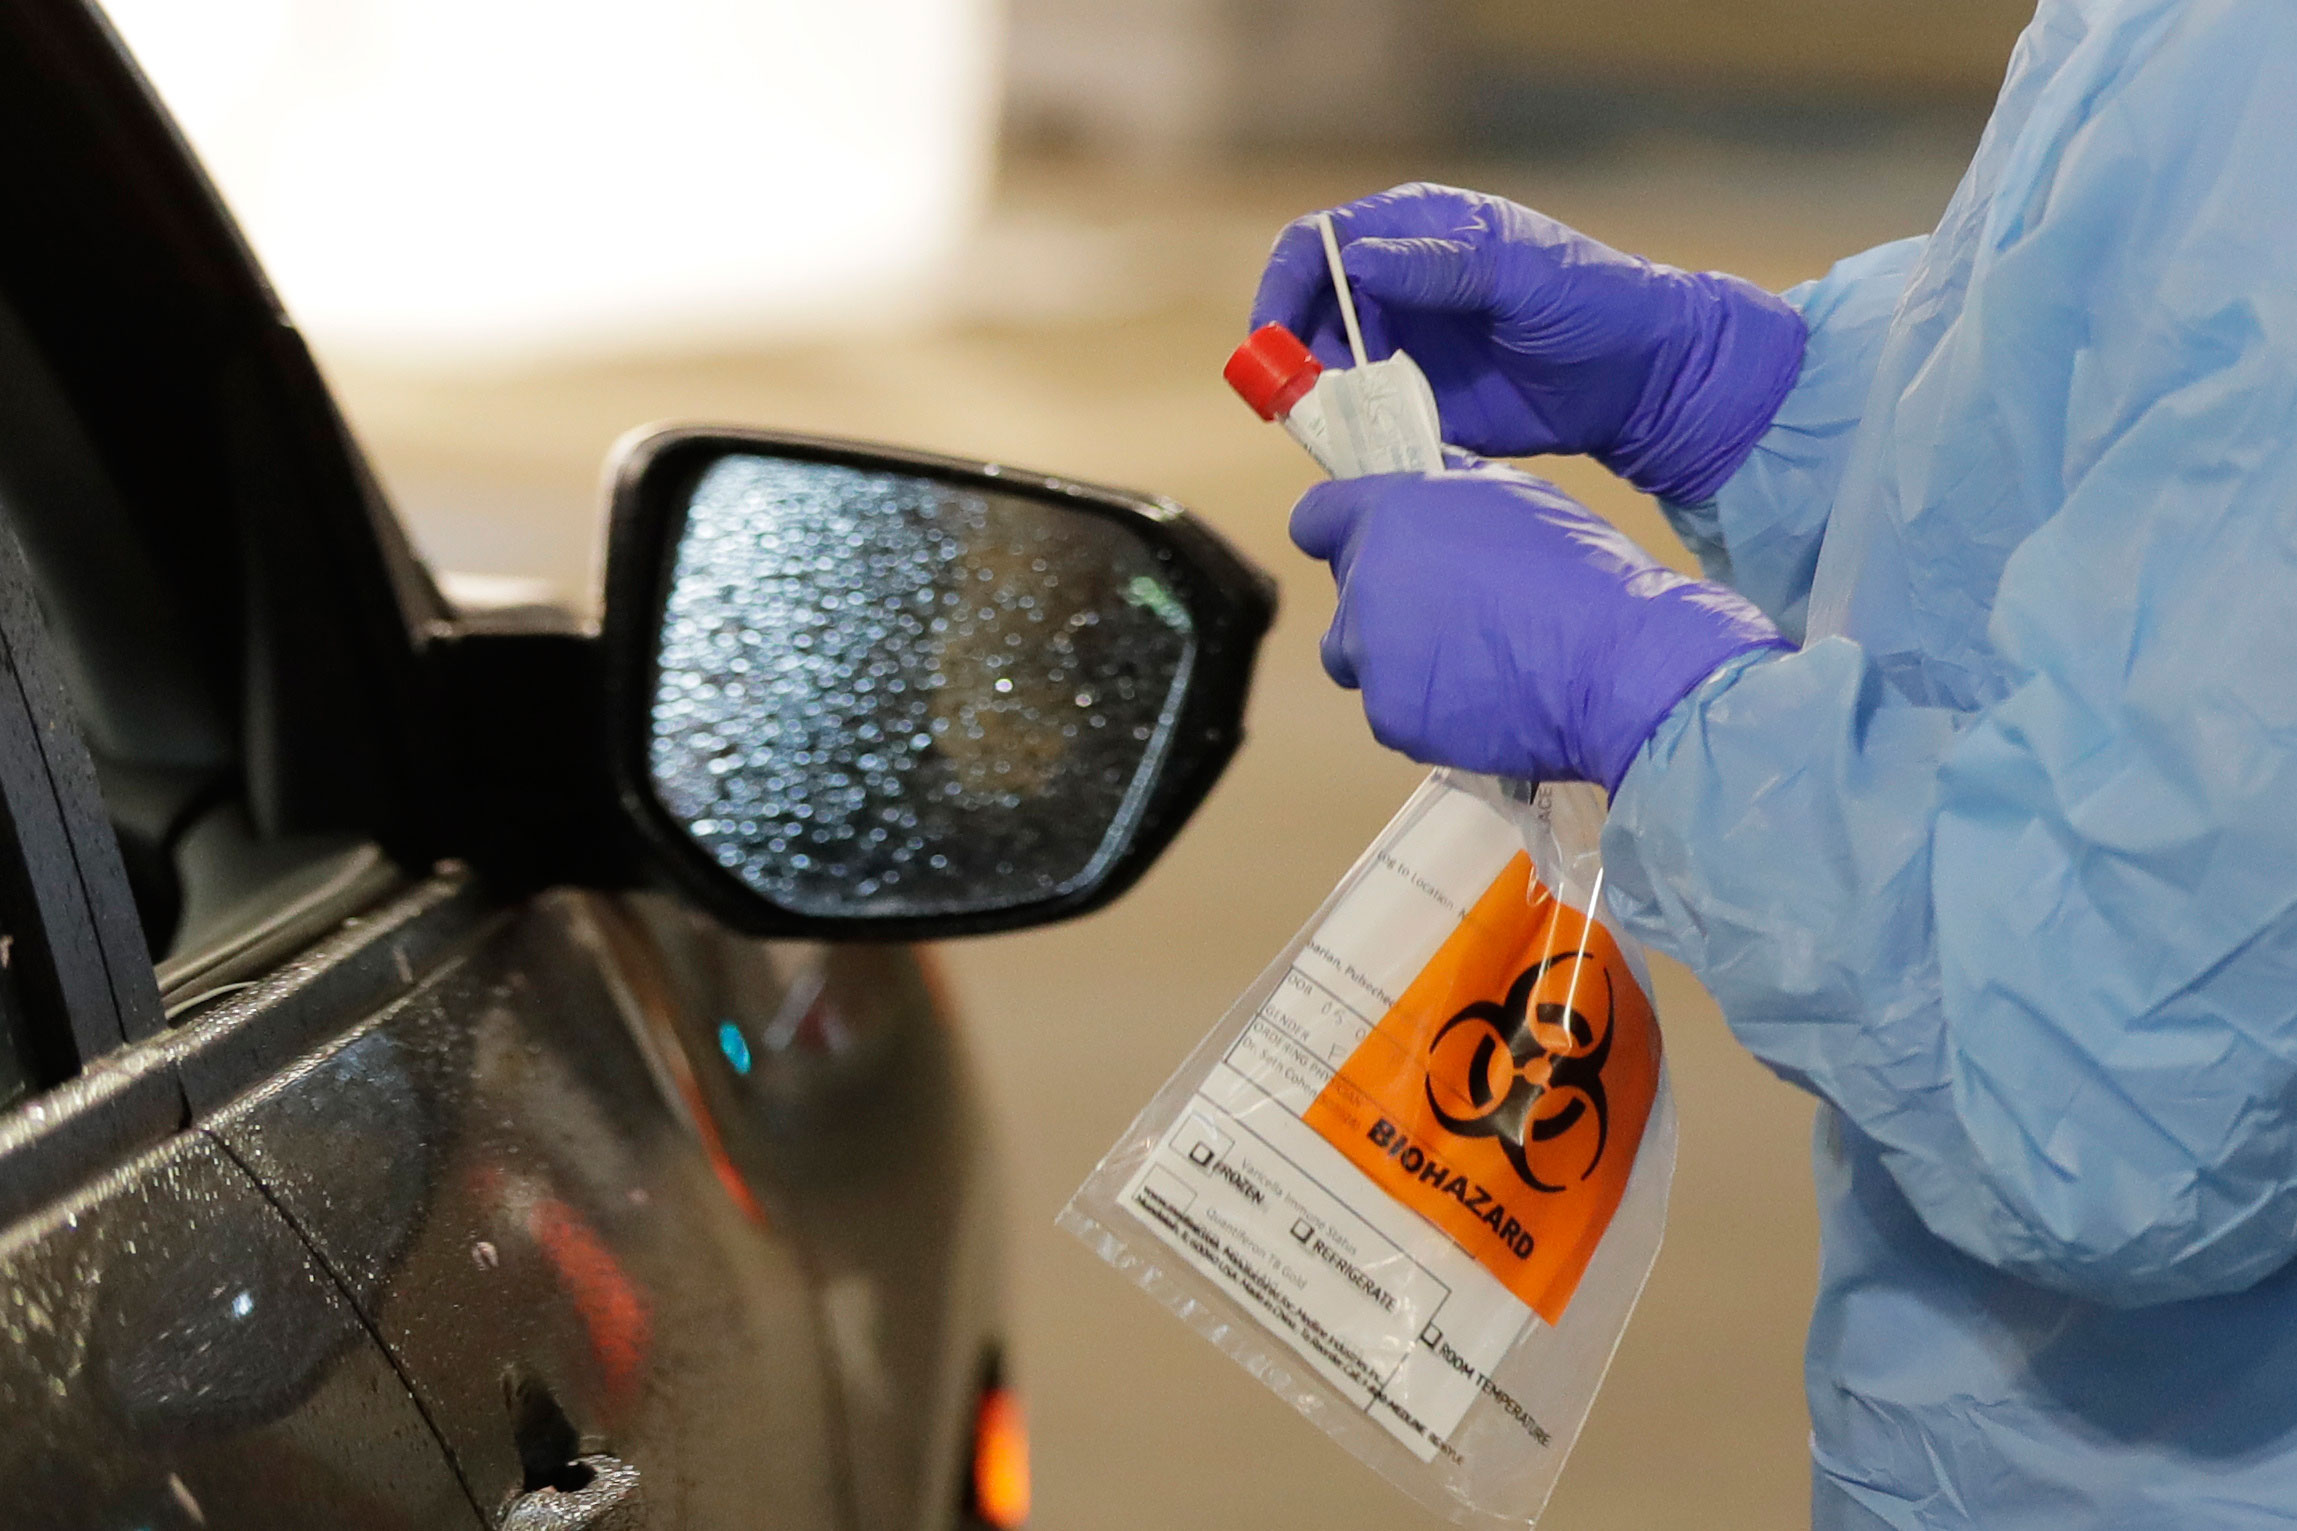 A nurse holds a swab to take a sample at a drive up coronavirus testing station at the University of Washington Medical Center in Seattle on March 13.